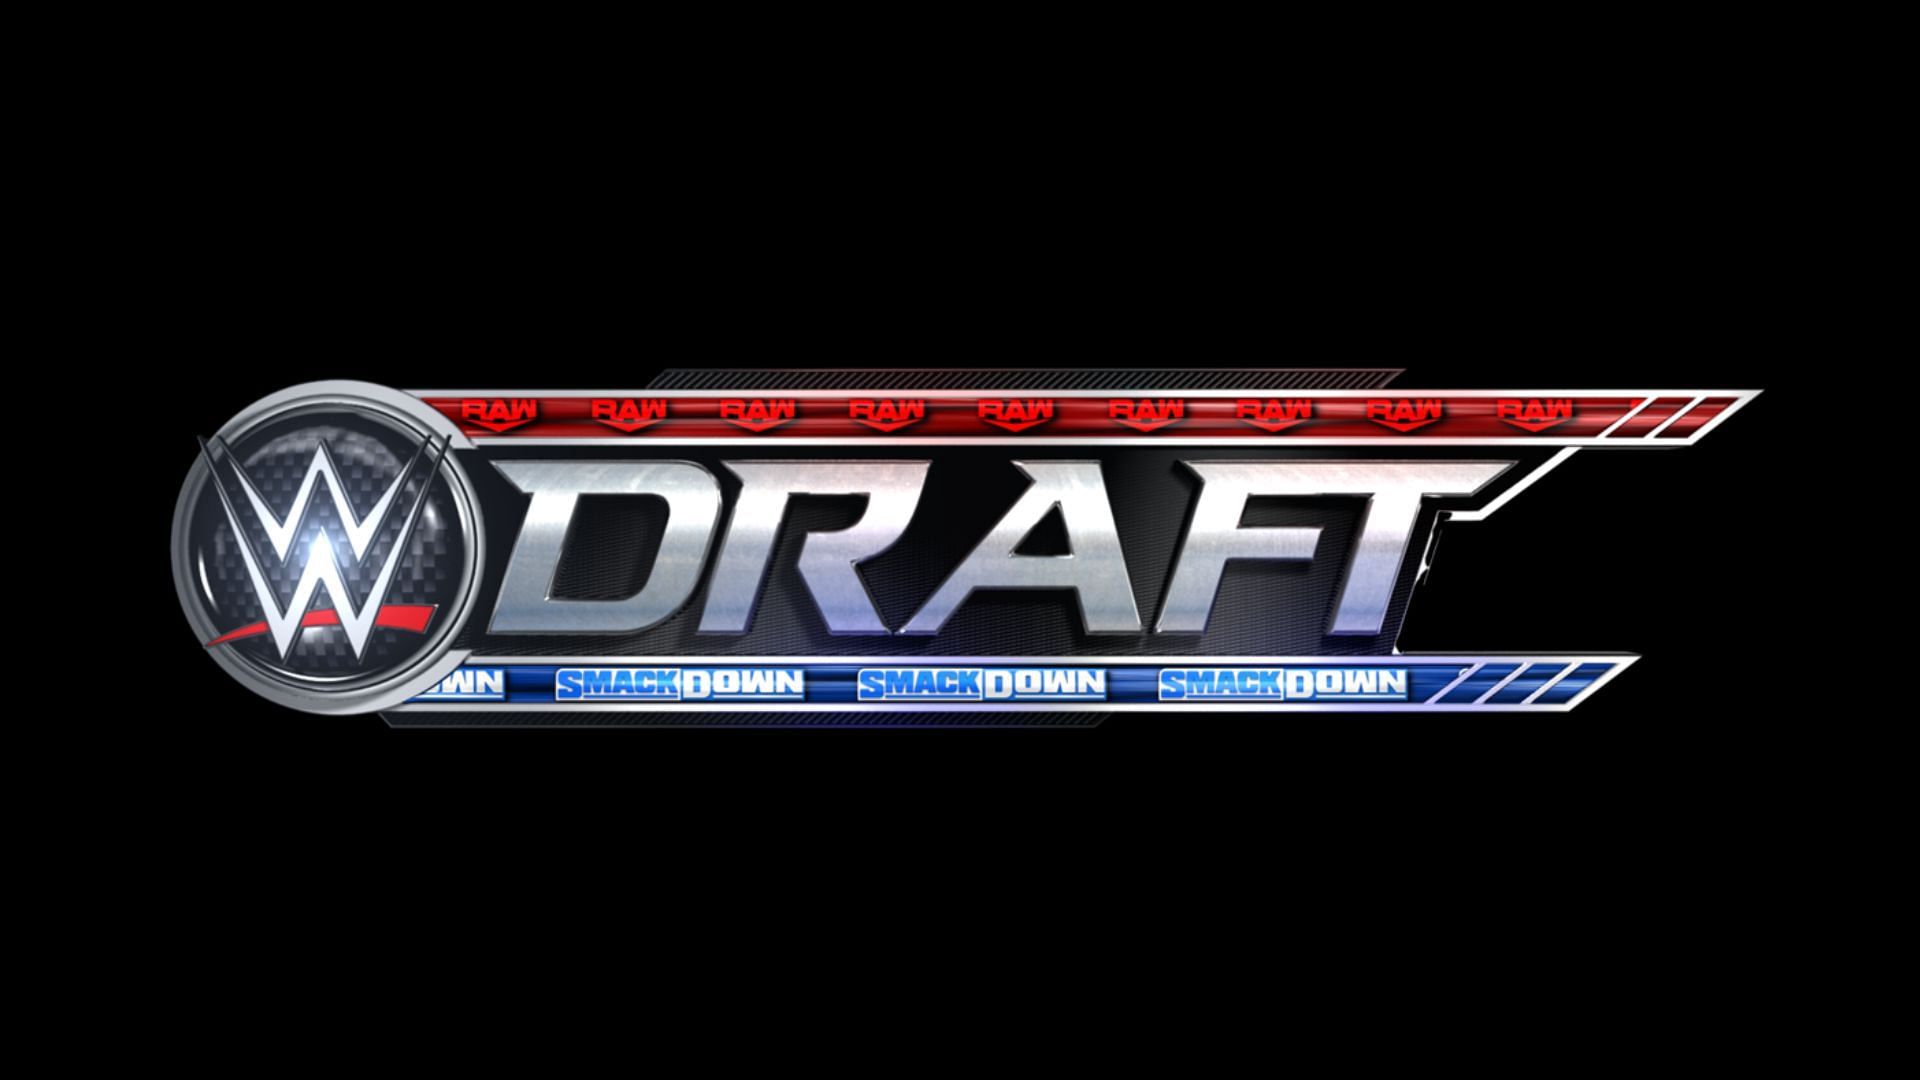 The 2023 WWE Draft took place on April 28 and May 1